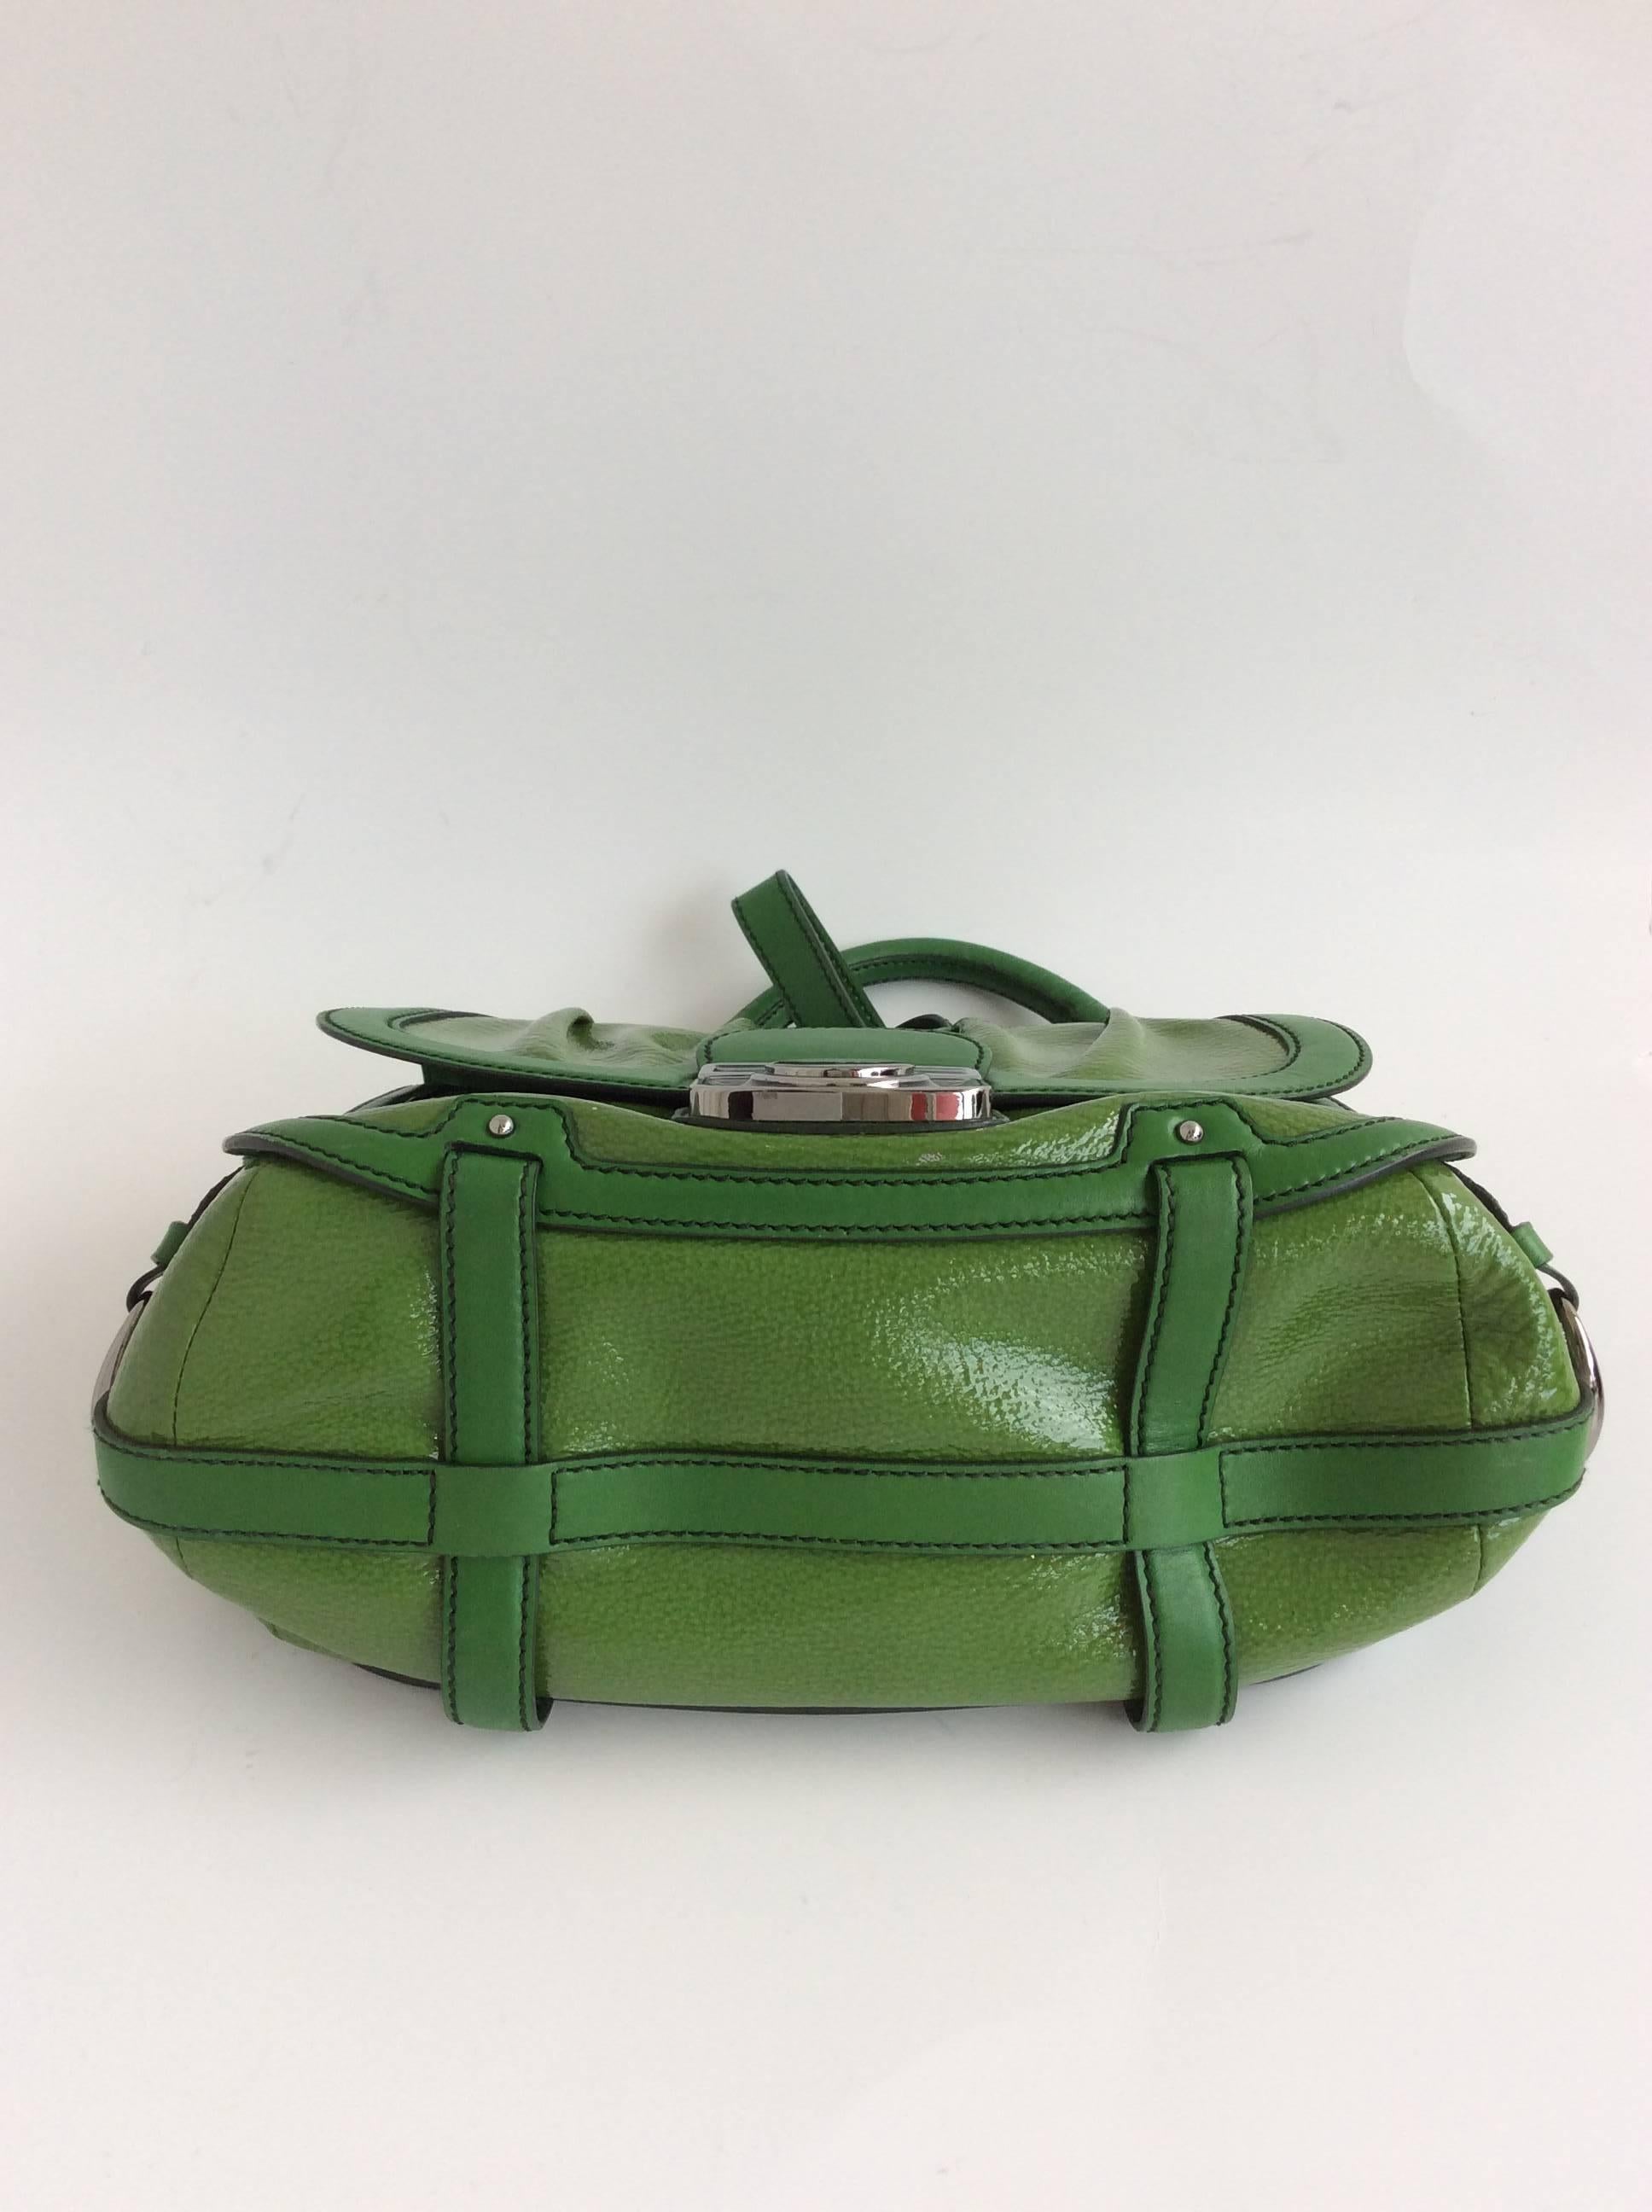 Celine Green Patent Leather Satchel with Shoulder Strap with Silver Hardware For Sale 1